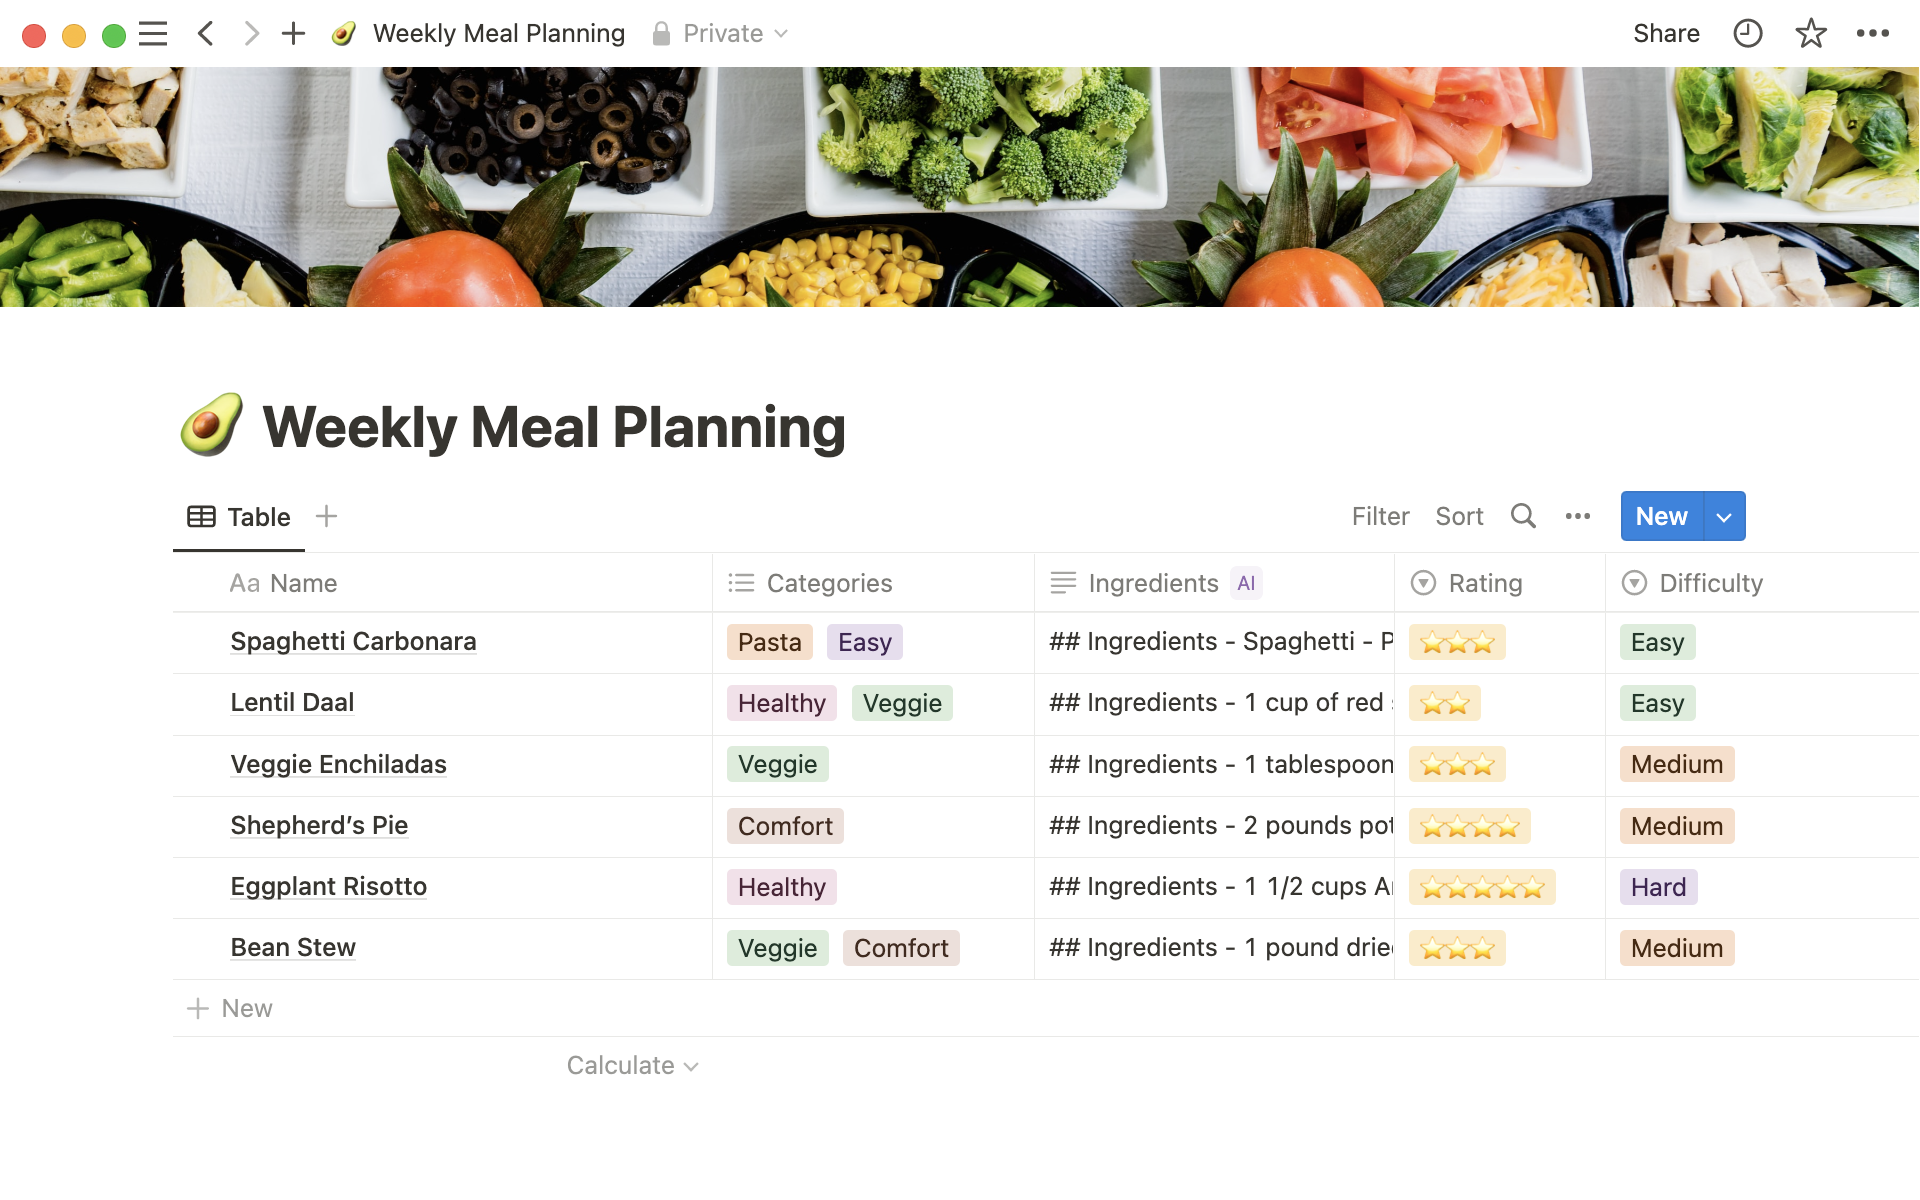 Plan your meals and save favorite recipes in a Notion database.